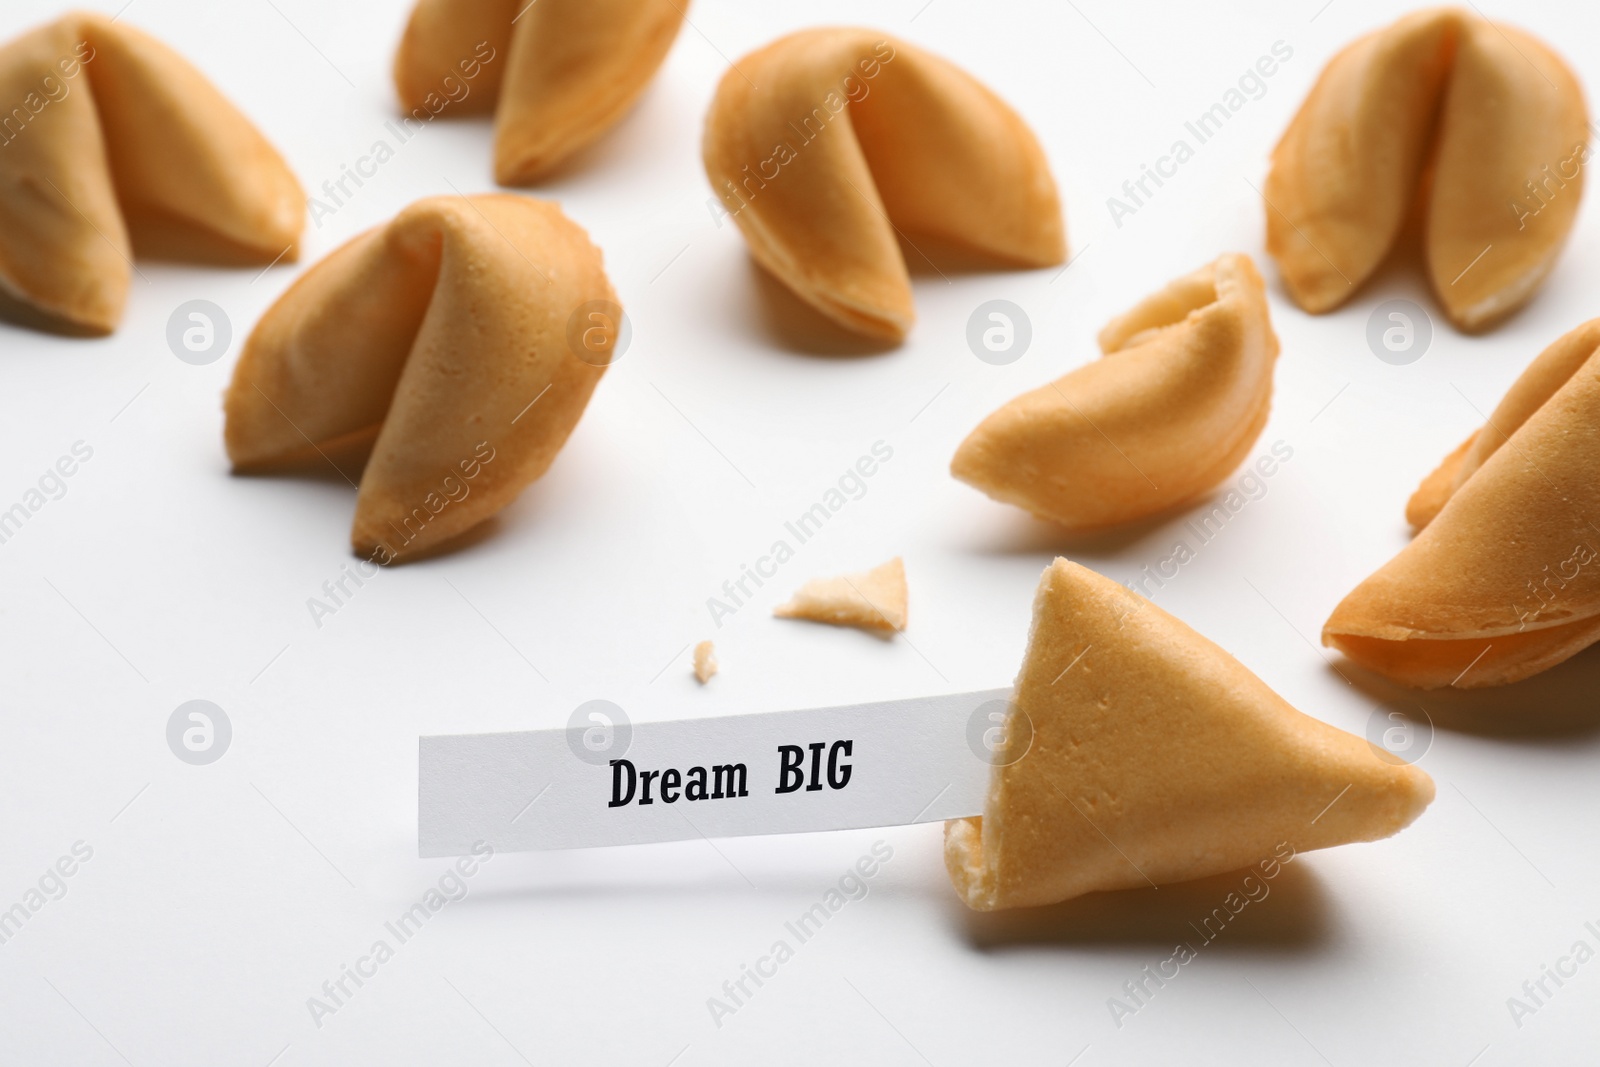 Image of Tasty fortune cookies with prediction Dream BIG on white background